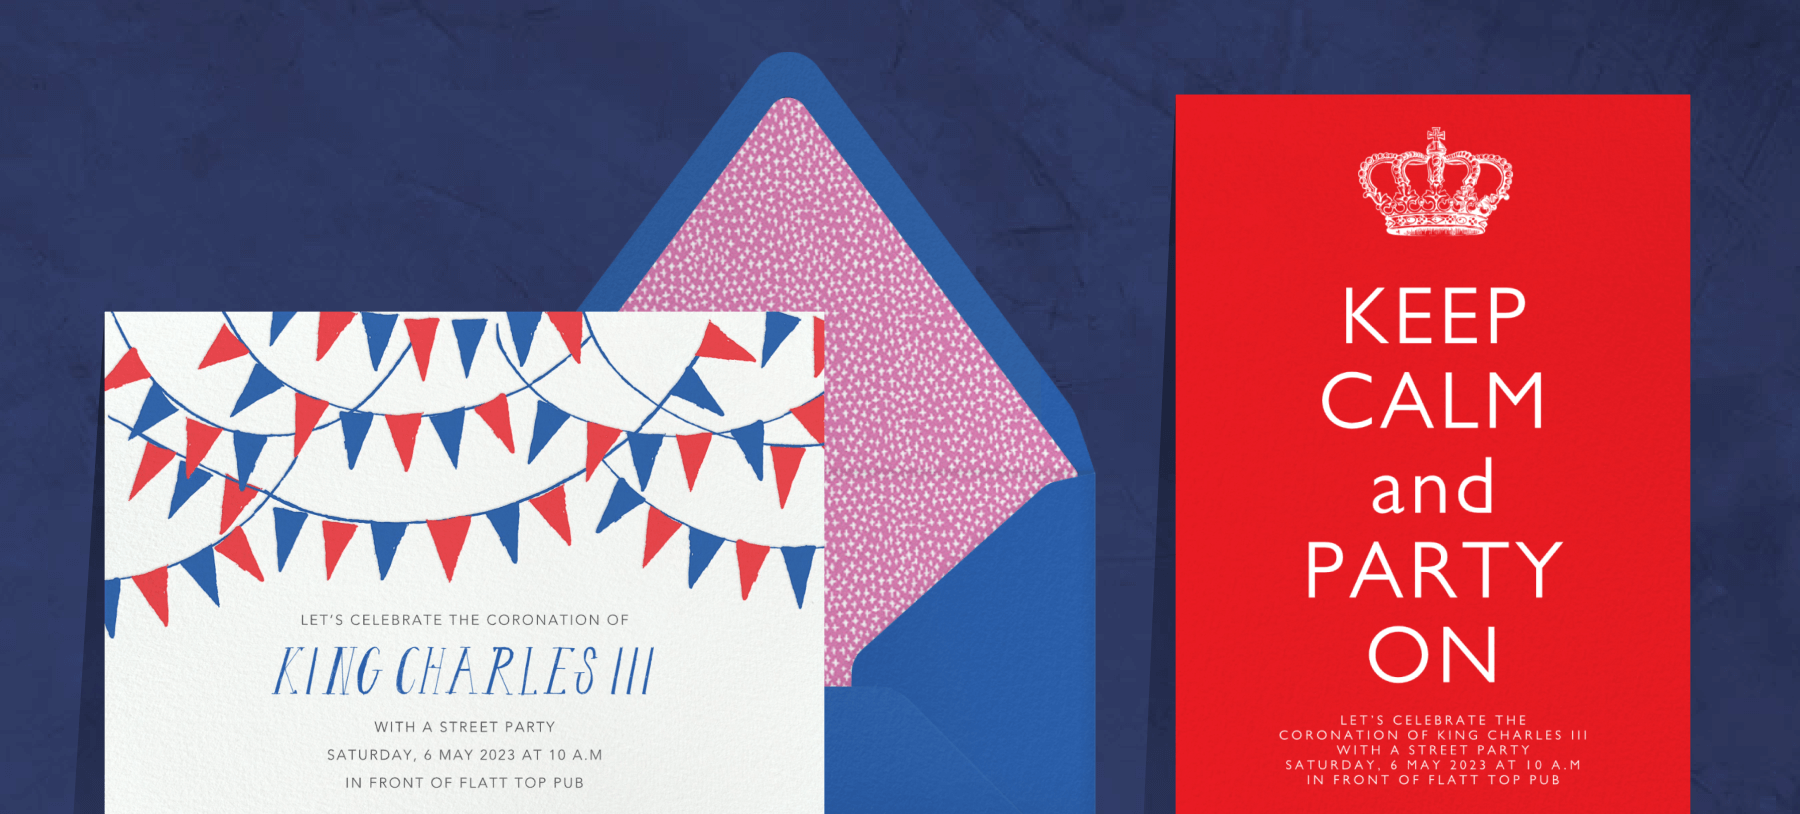 Left, a white invitation with blue and red bunting flags; center, a blue envelope with pinked dotted liner; right a red invitation that reads “KEEP CALM AND PARTY ON” with a crown on top.